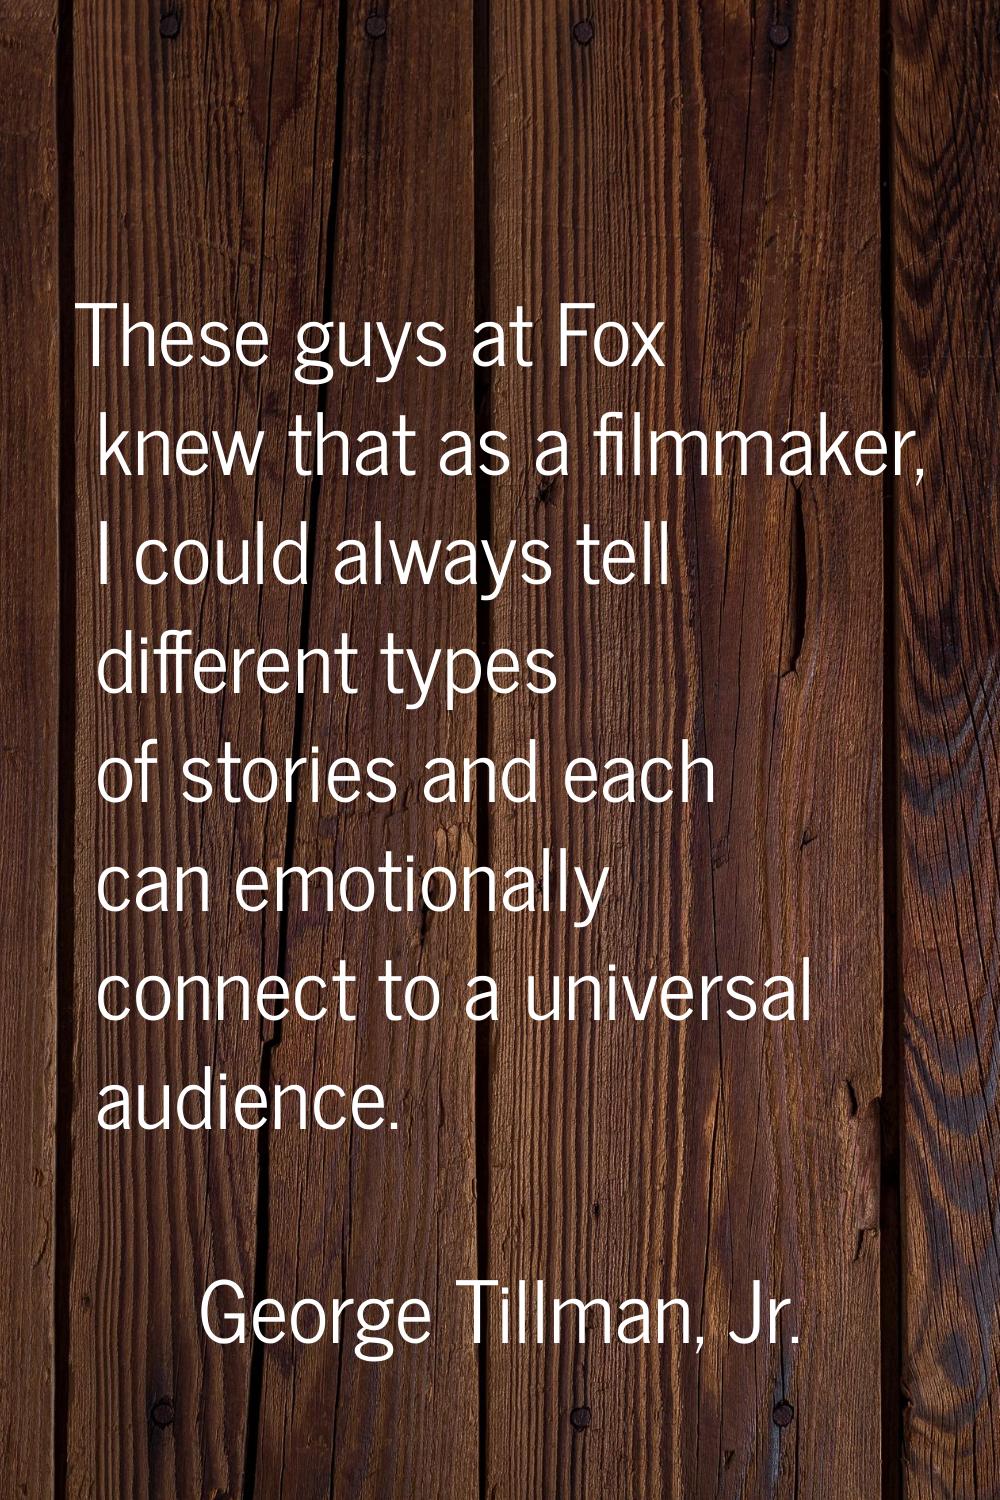 These guys at Fox knew that as a filmmaker, I could always tell different types of stories and each